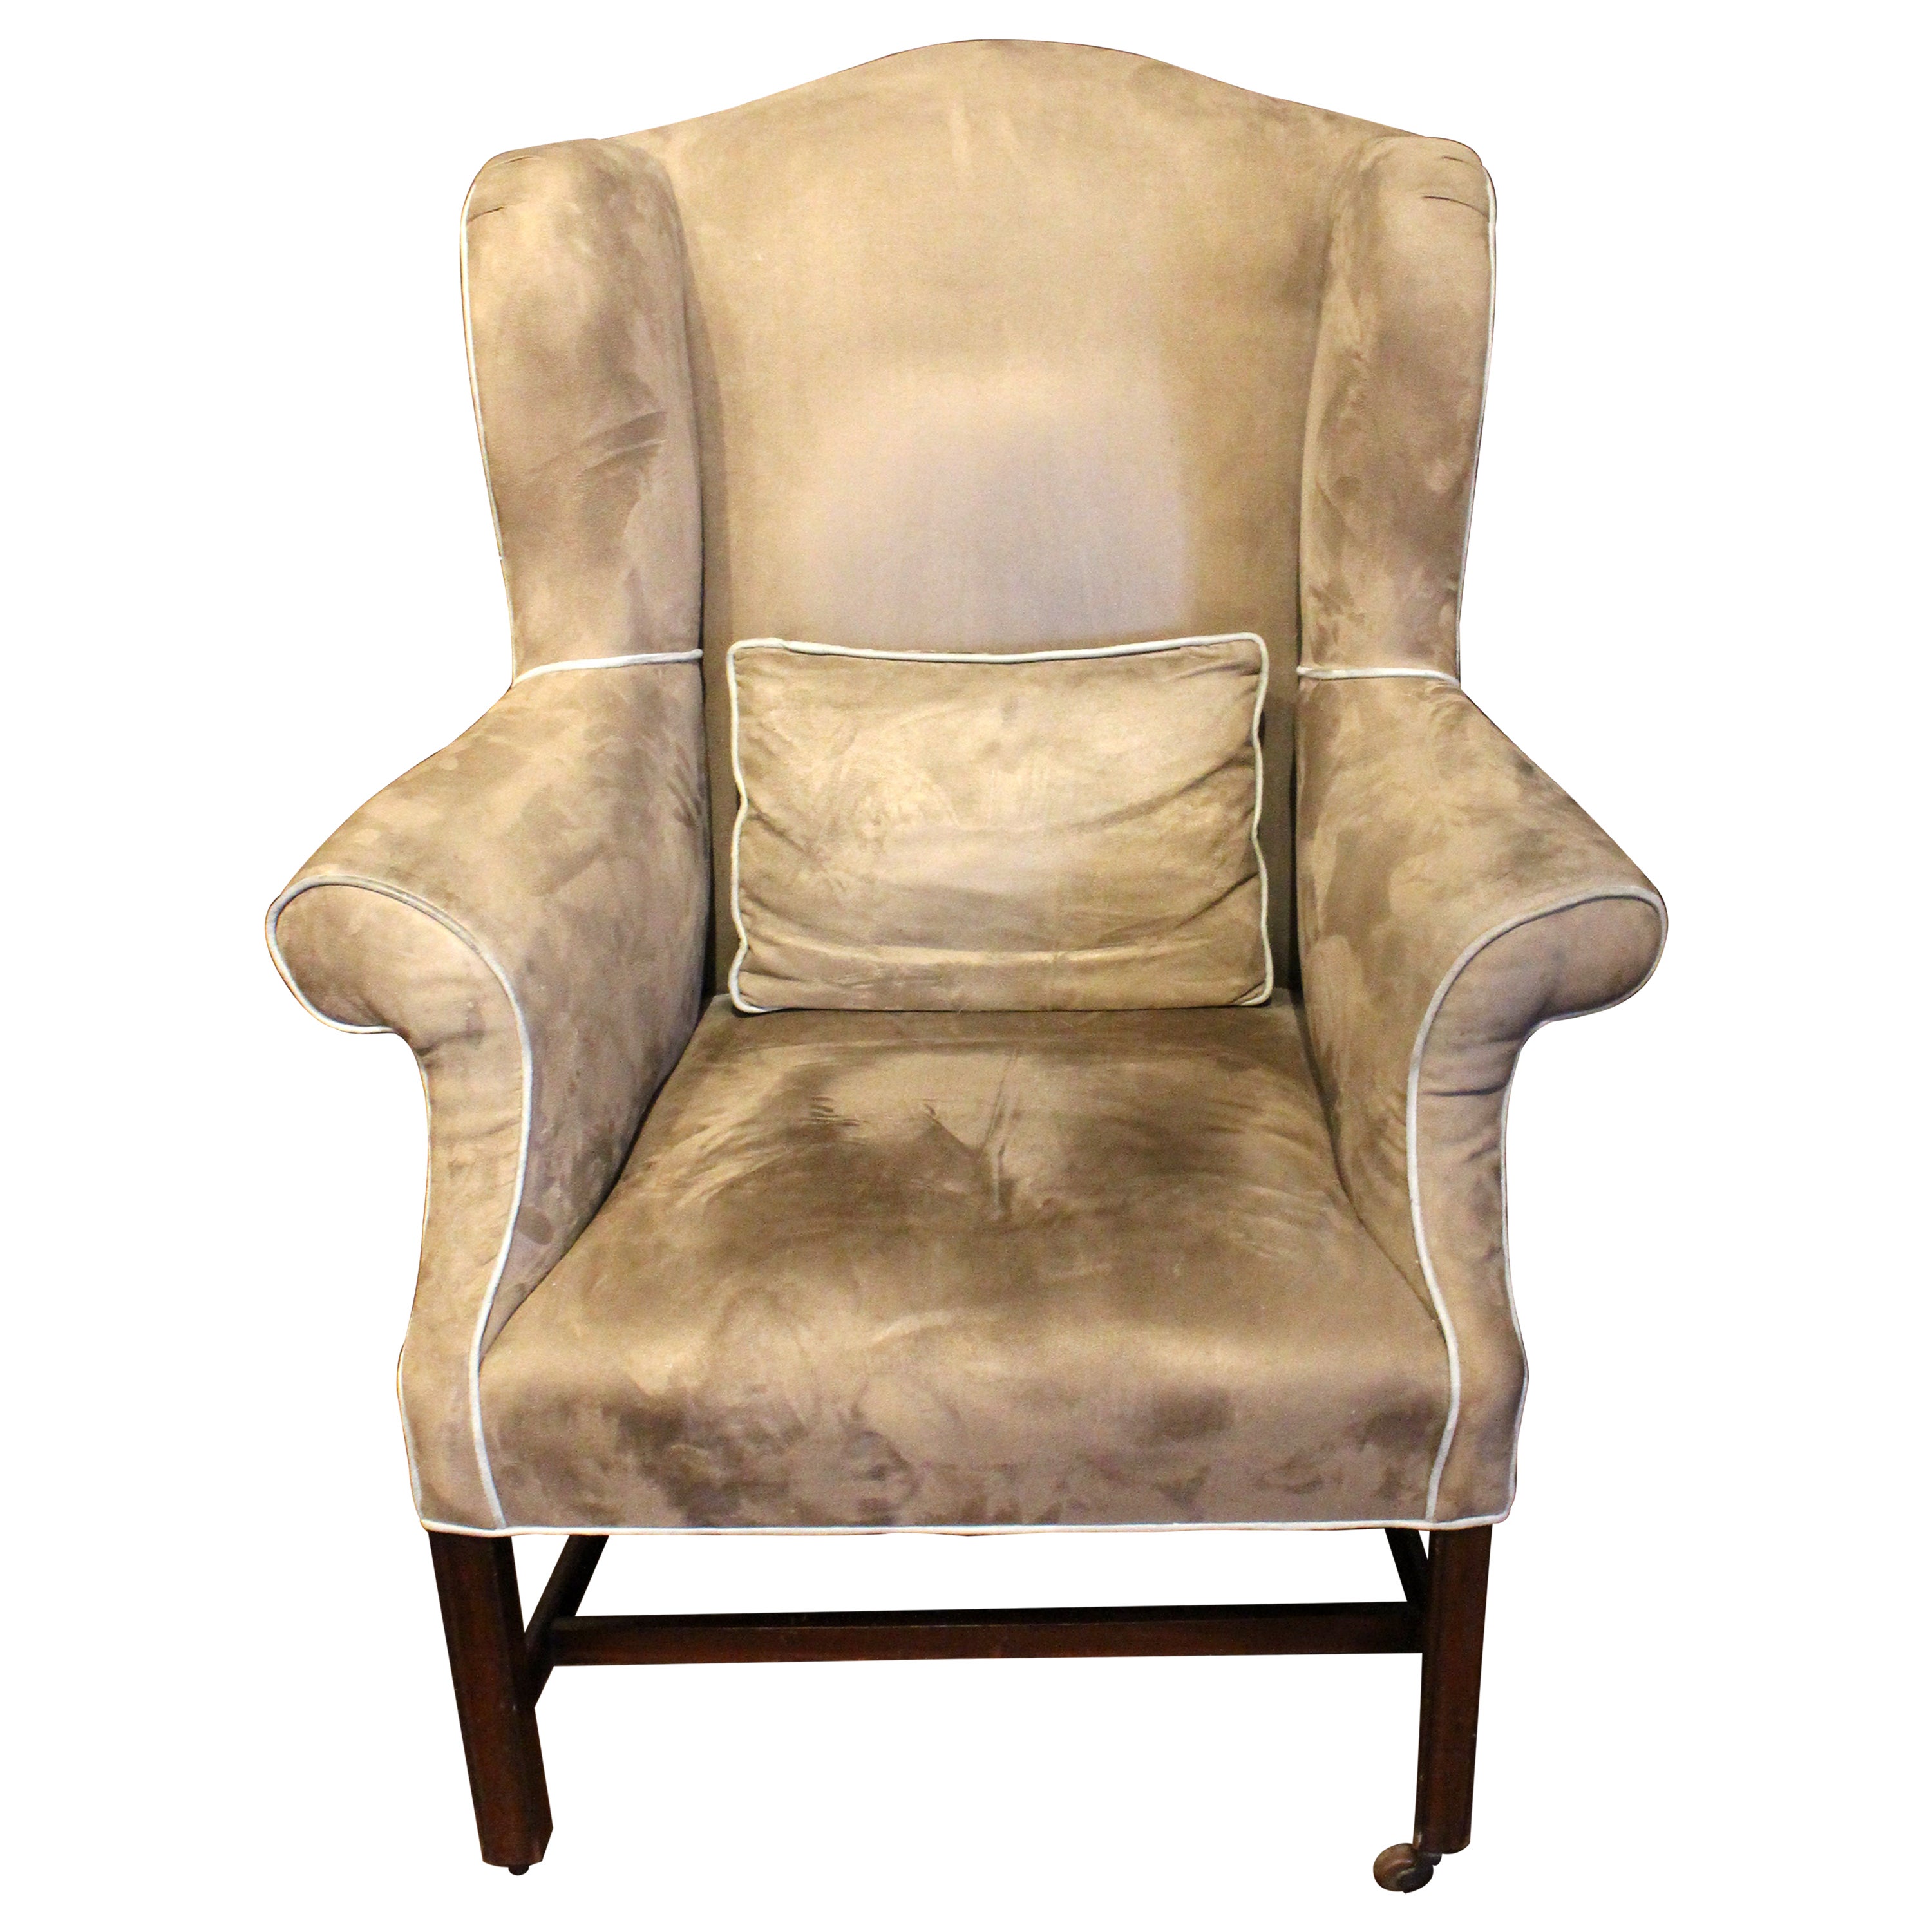 c. 1765-80 George III Period Wingback Arm Chair For Sale